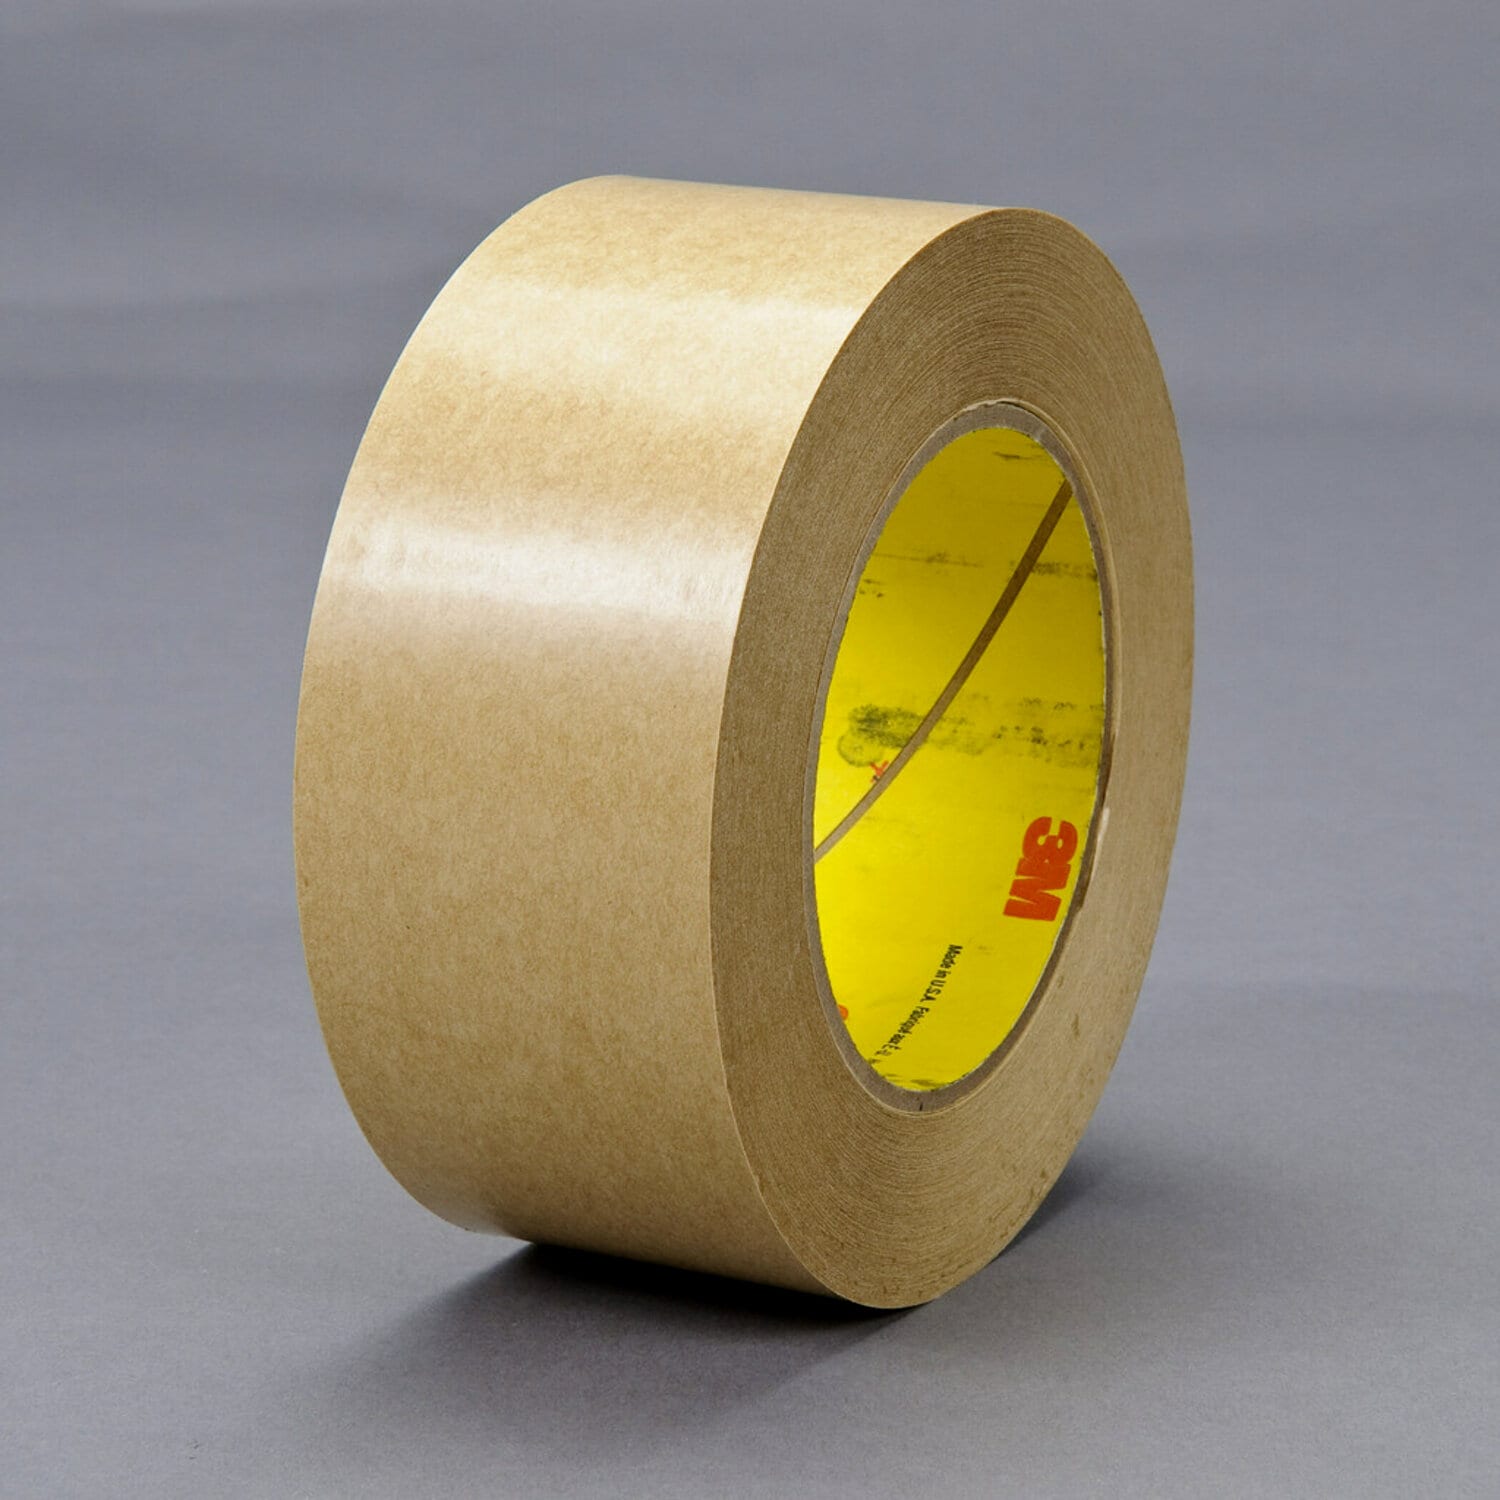 7010312131 - 3M Adhesive Transfer Tape 465, Clear, 1 in x 240 yd, 2 mil, 9 rolls per
case